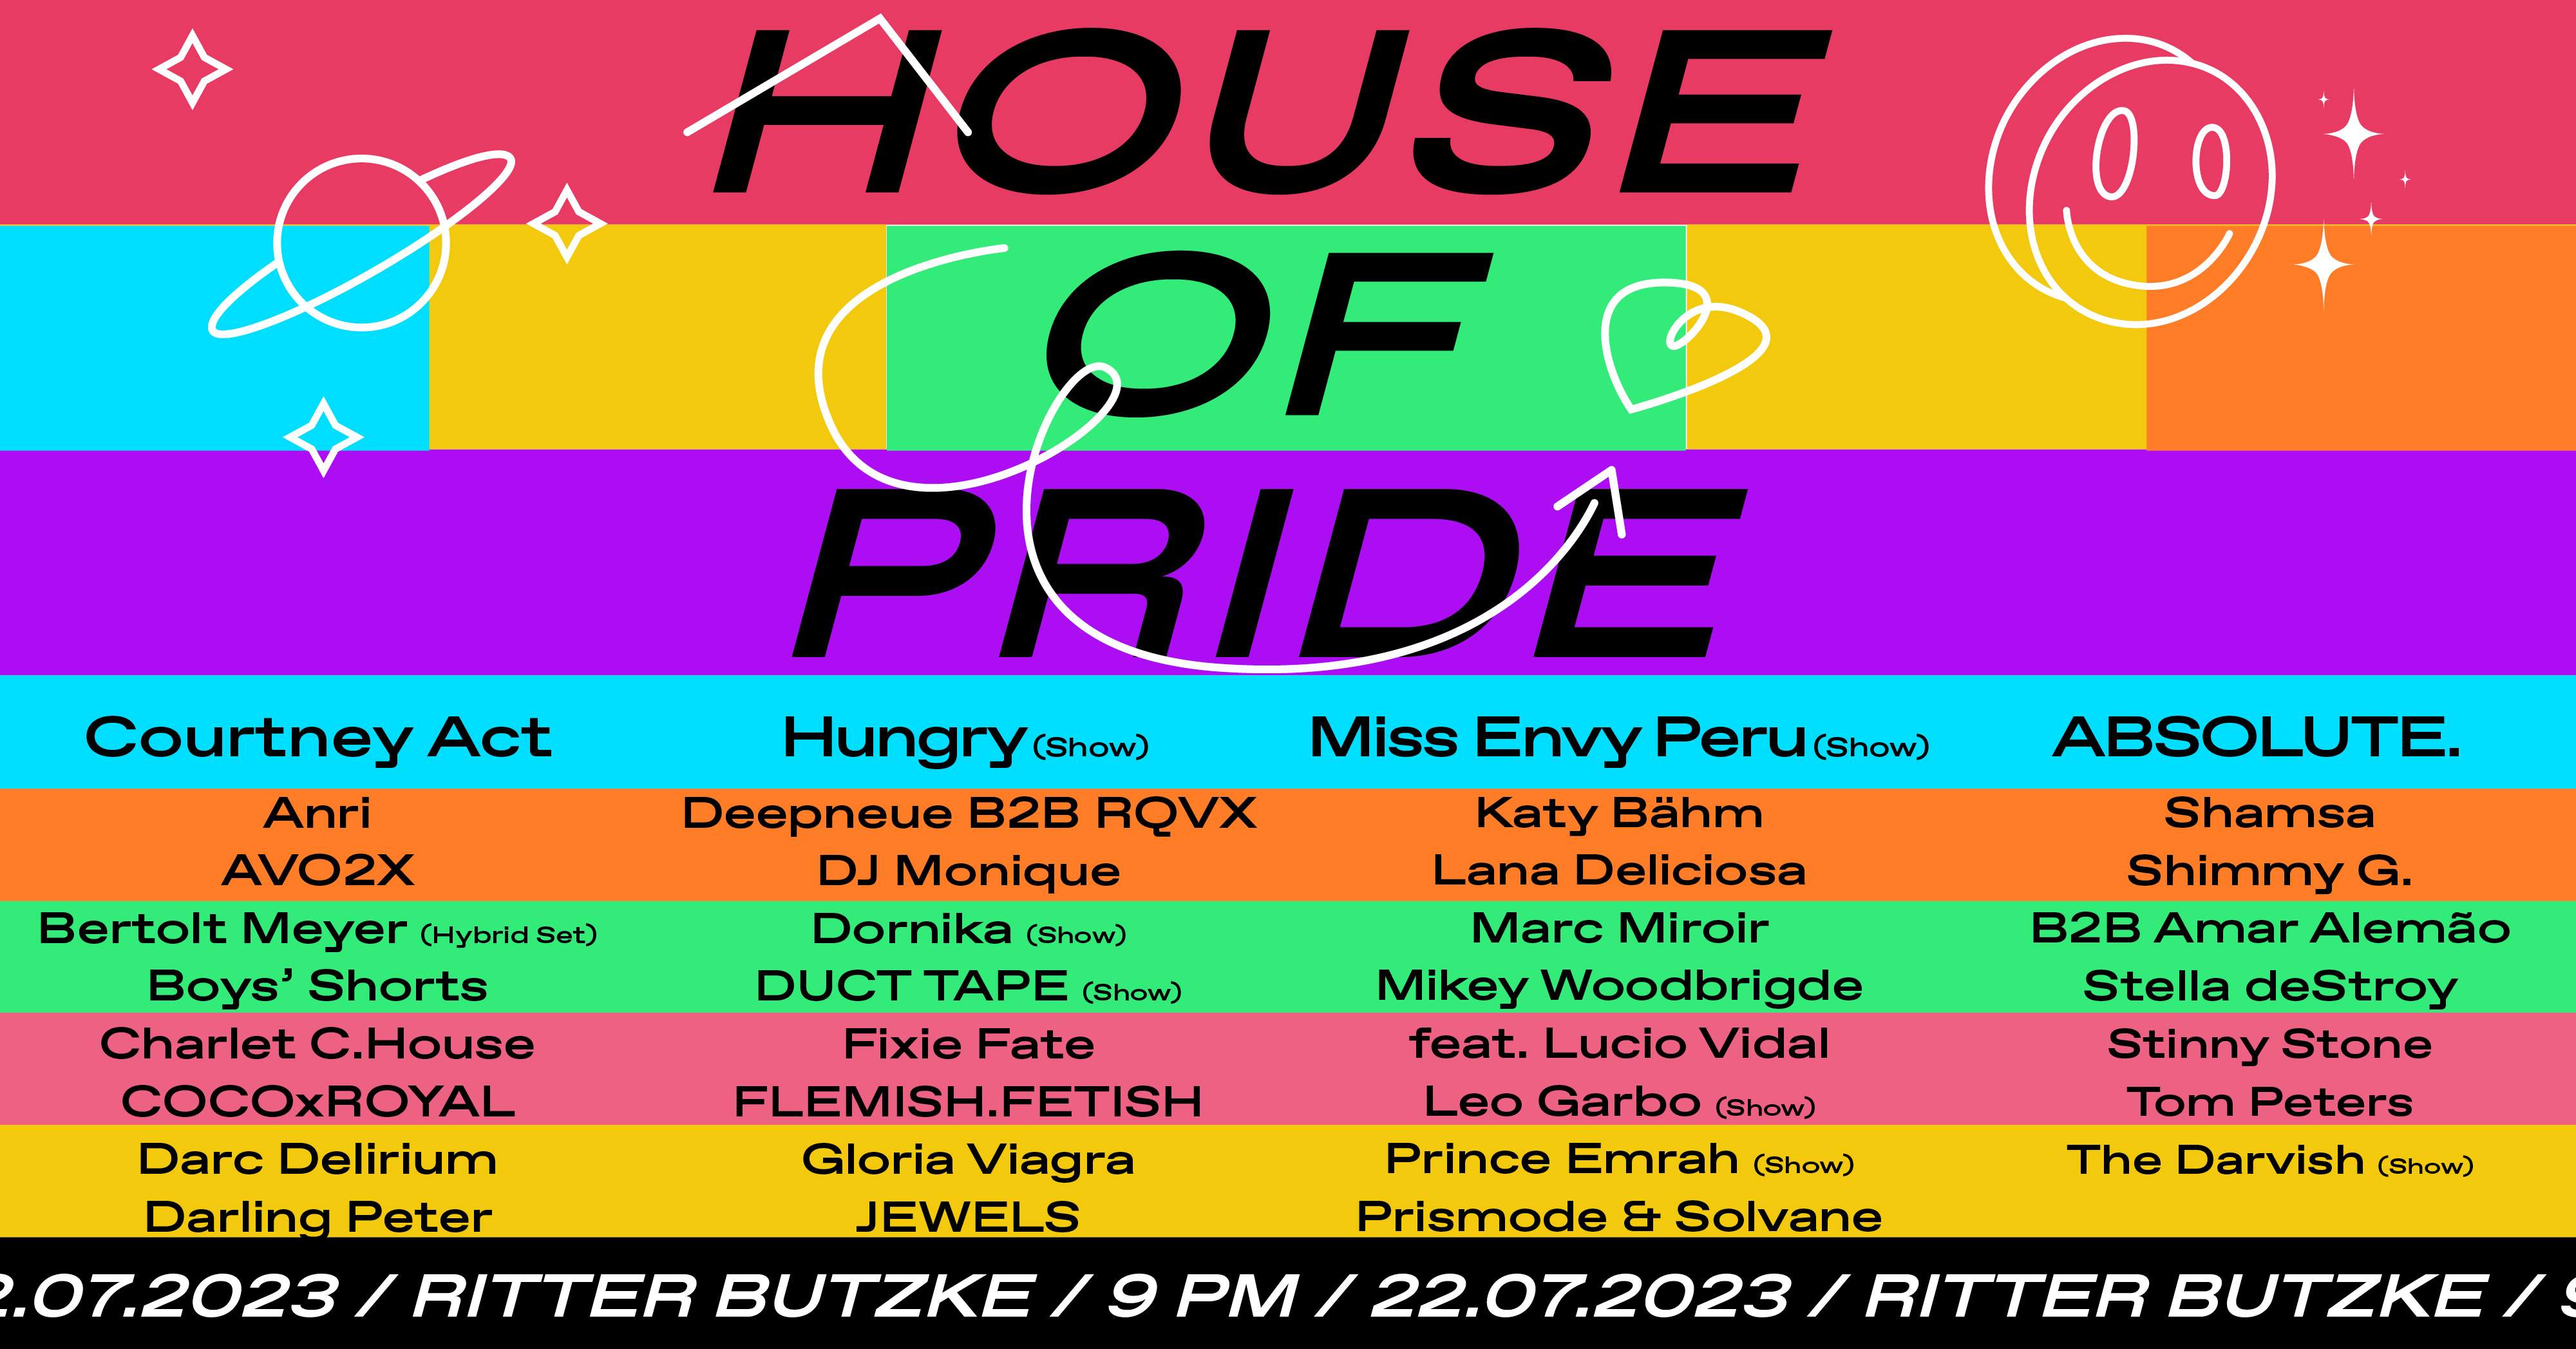 House of pride - フライヤー表